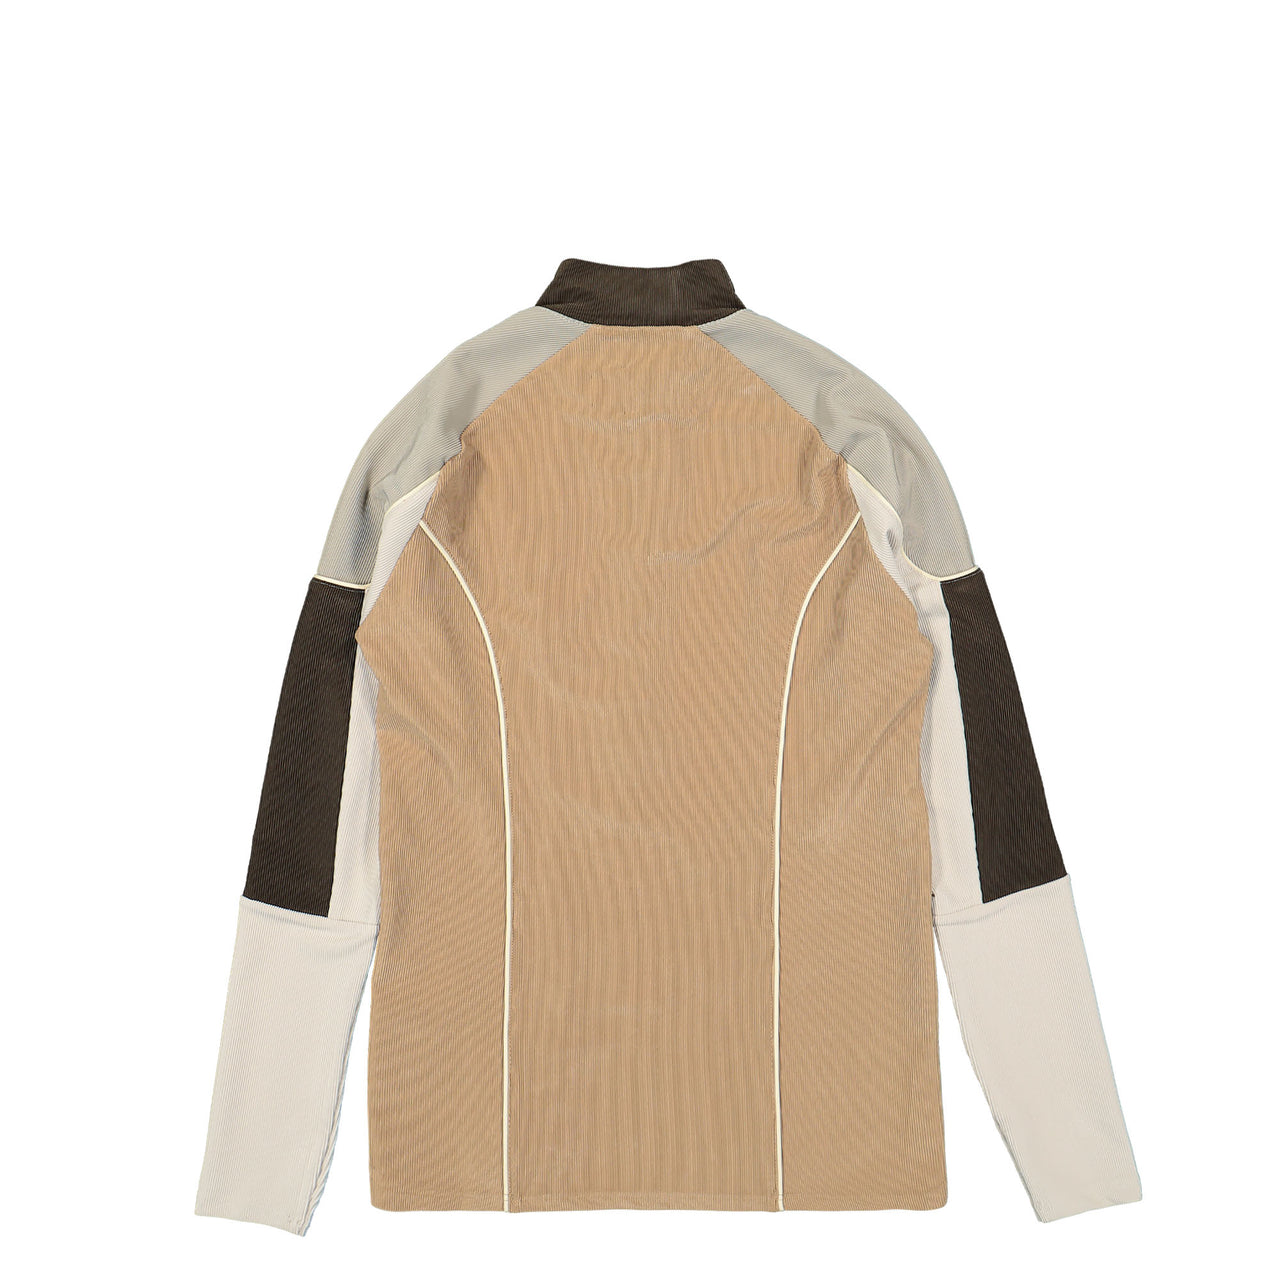 Mix Panelled Jersey Top